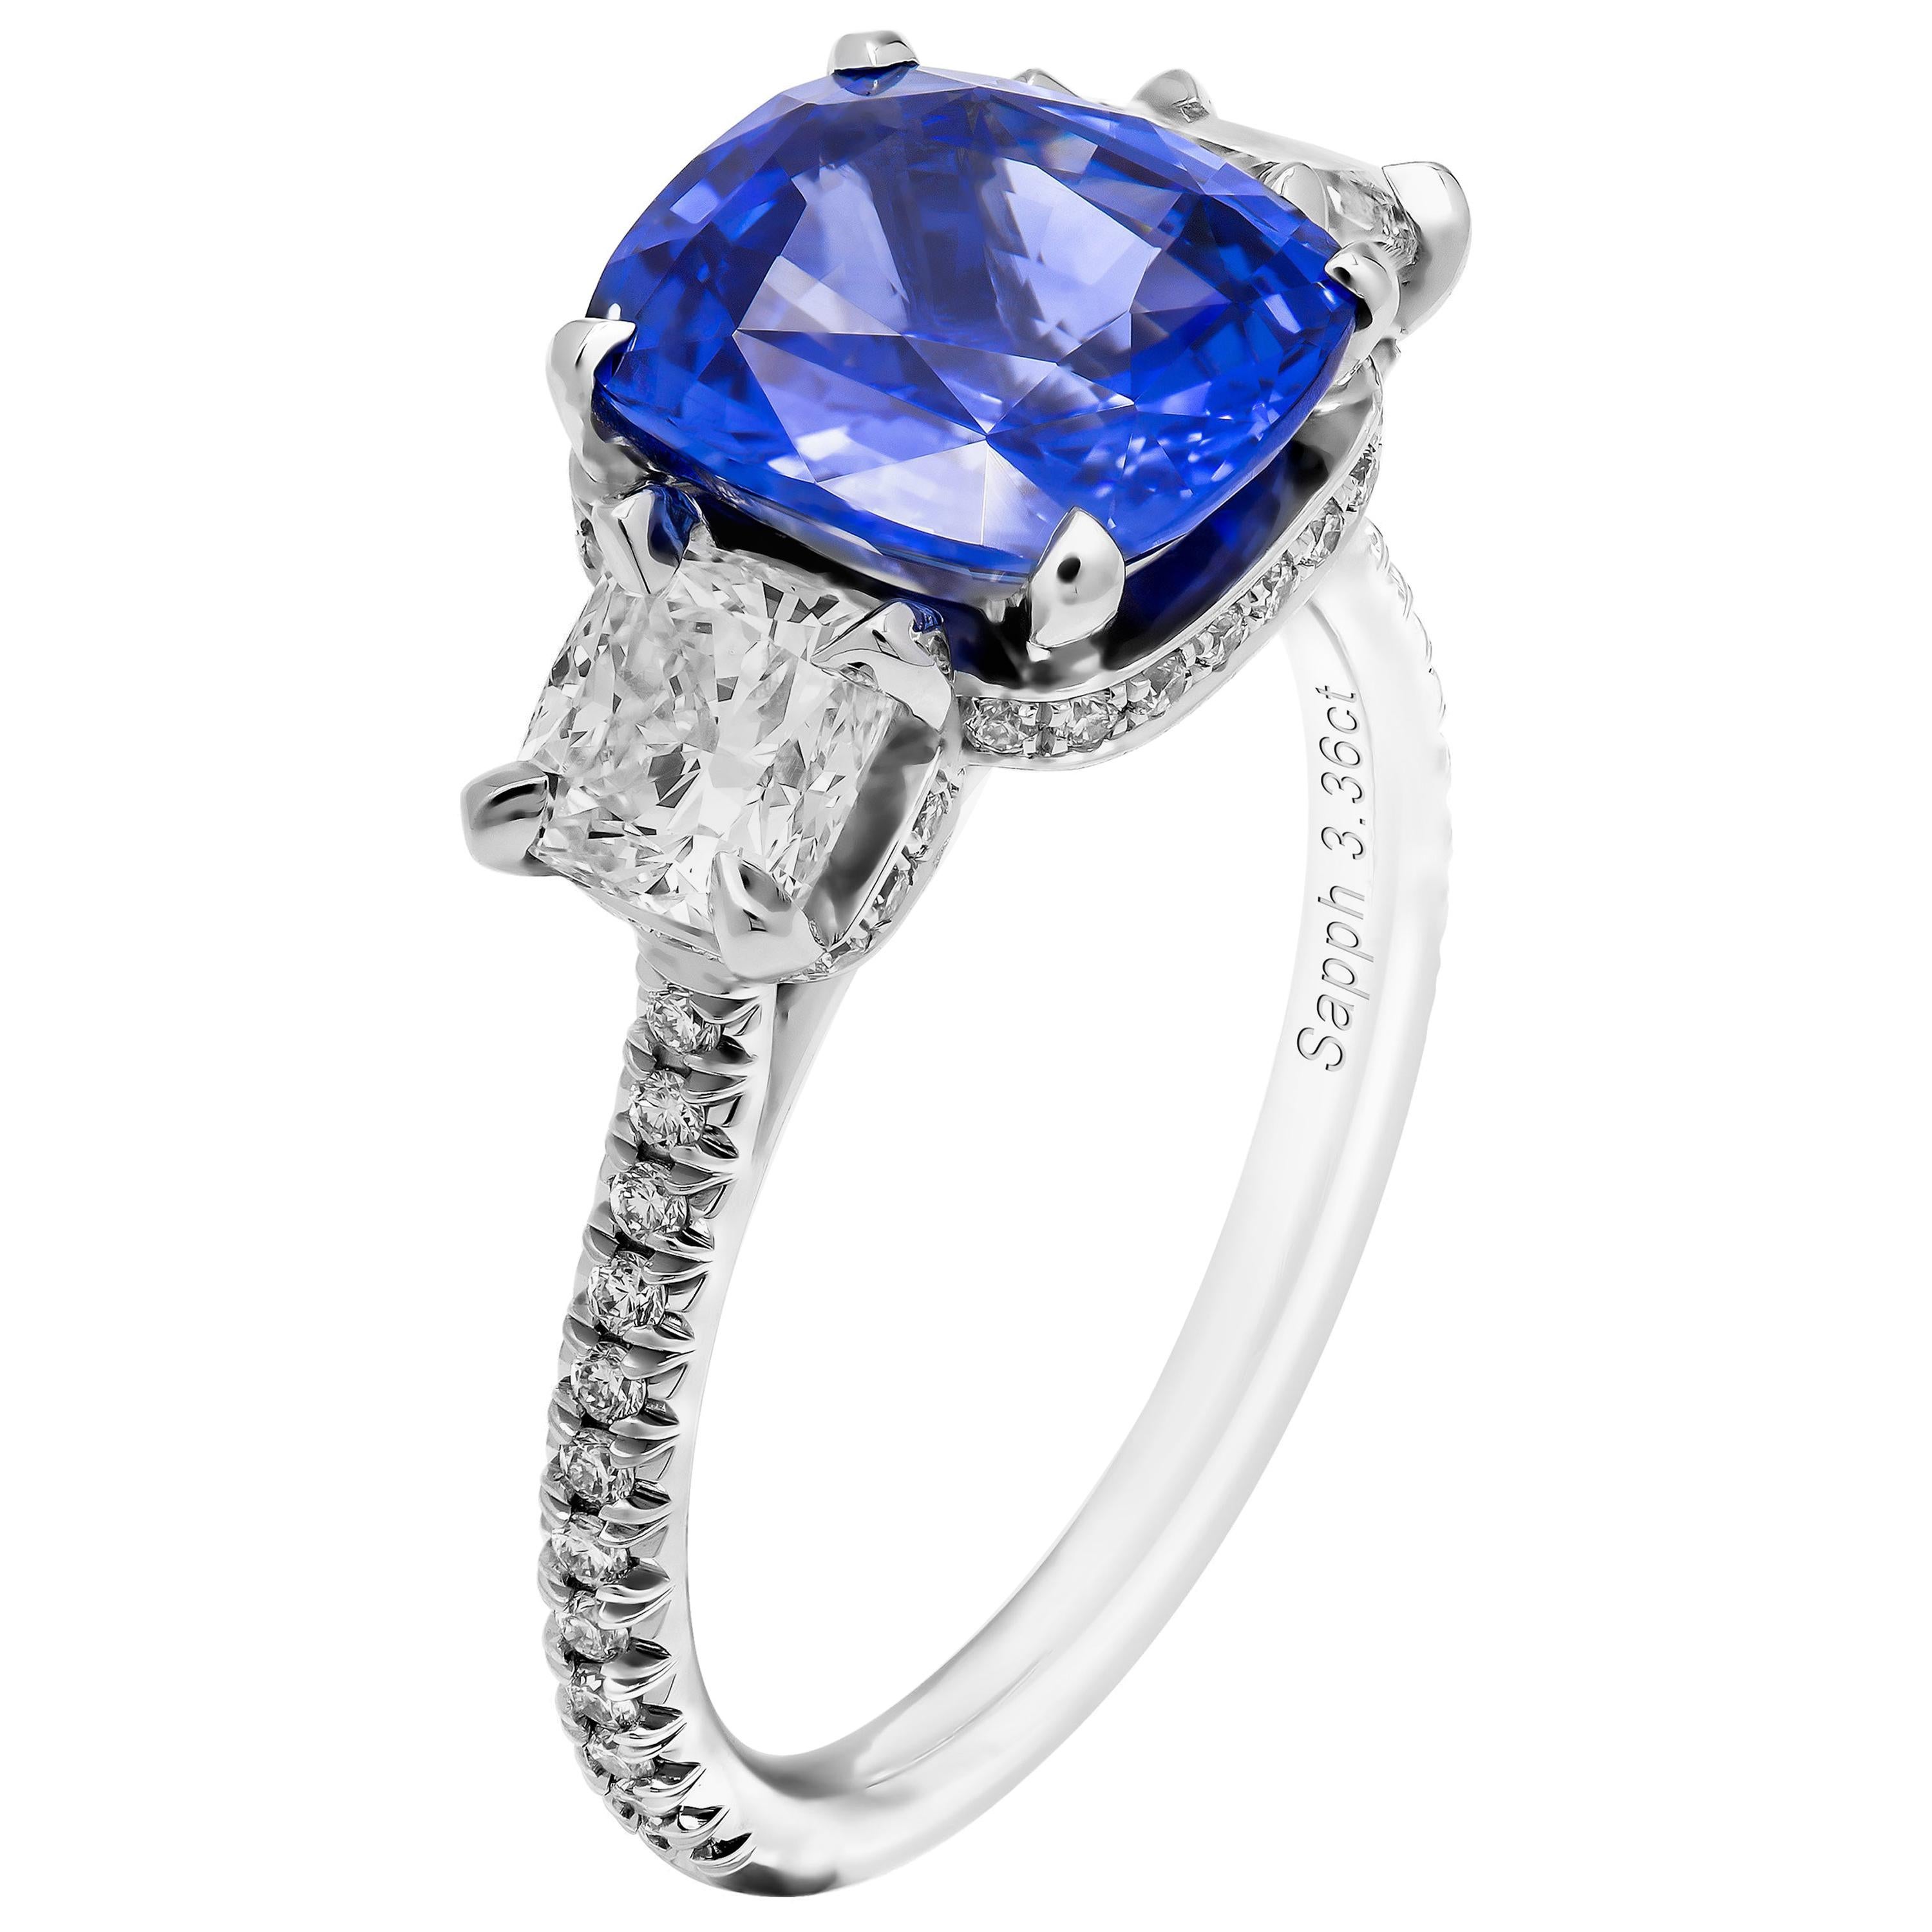 GIA Certified 3.36 Carat Blue Sapphire 3-Stone Ring